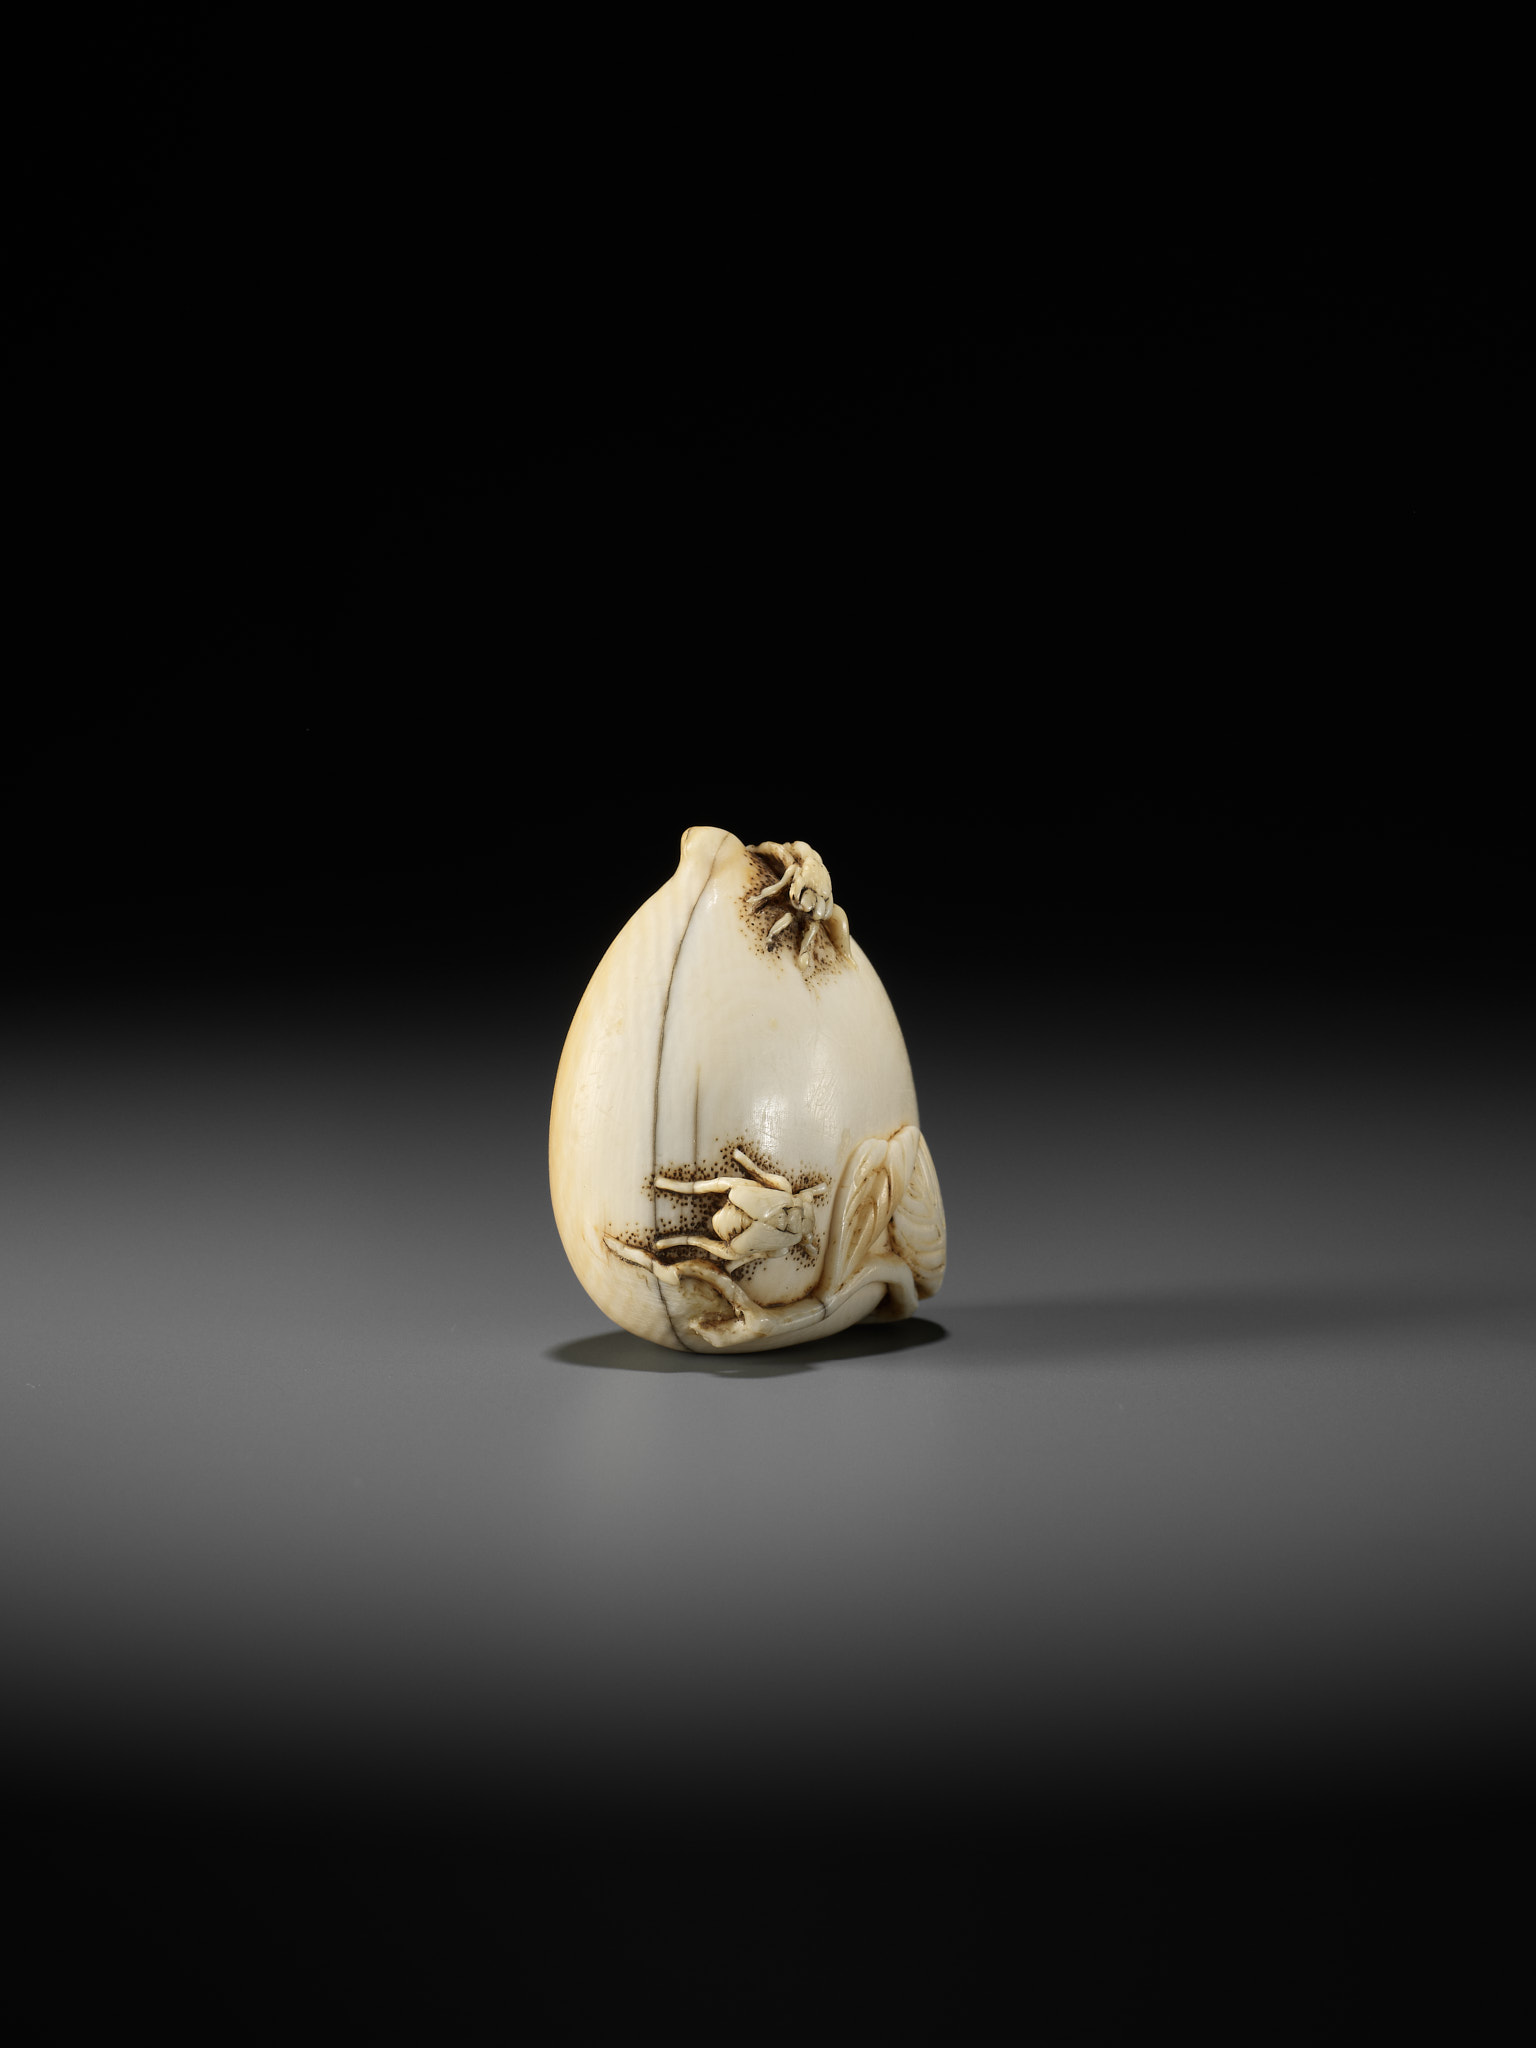 AN IVORY NETSUKE OF A PEACH WITH INSECTS - Image 6 of 10